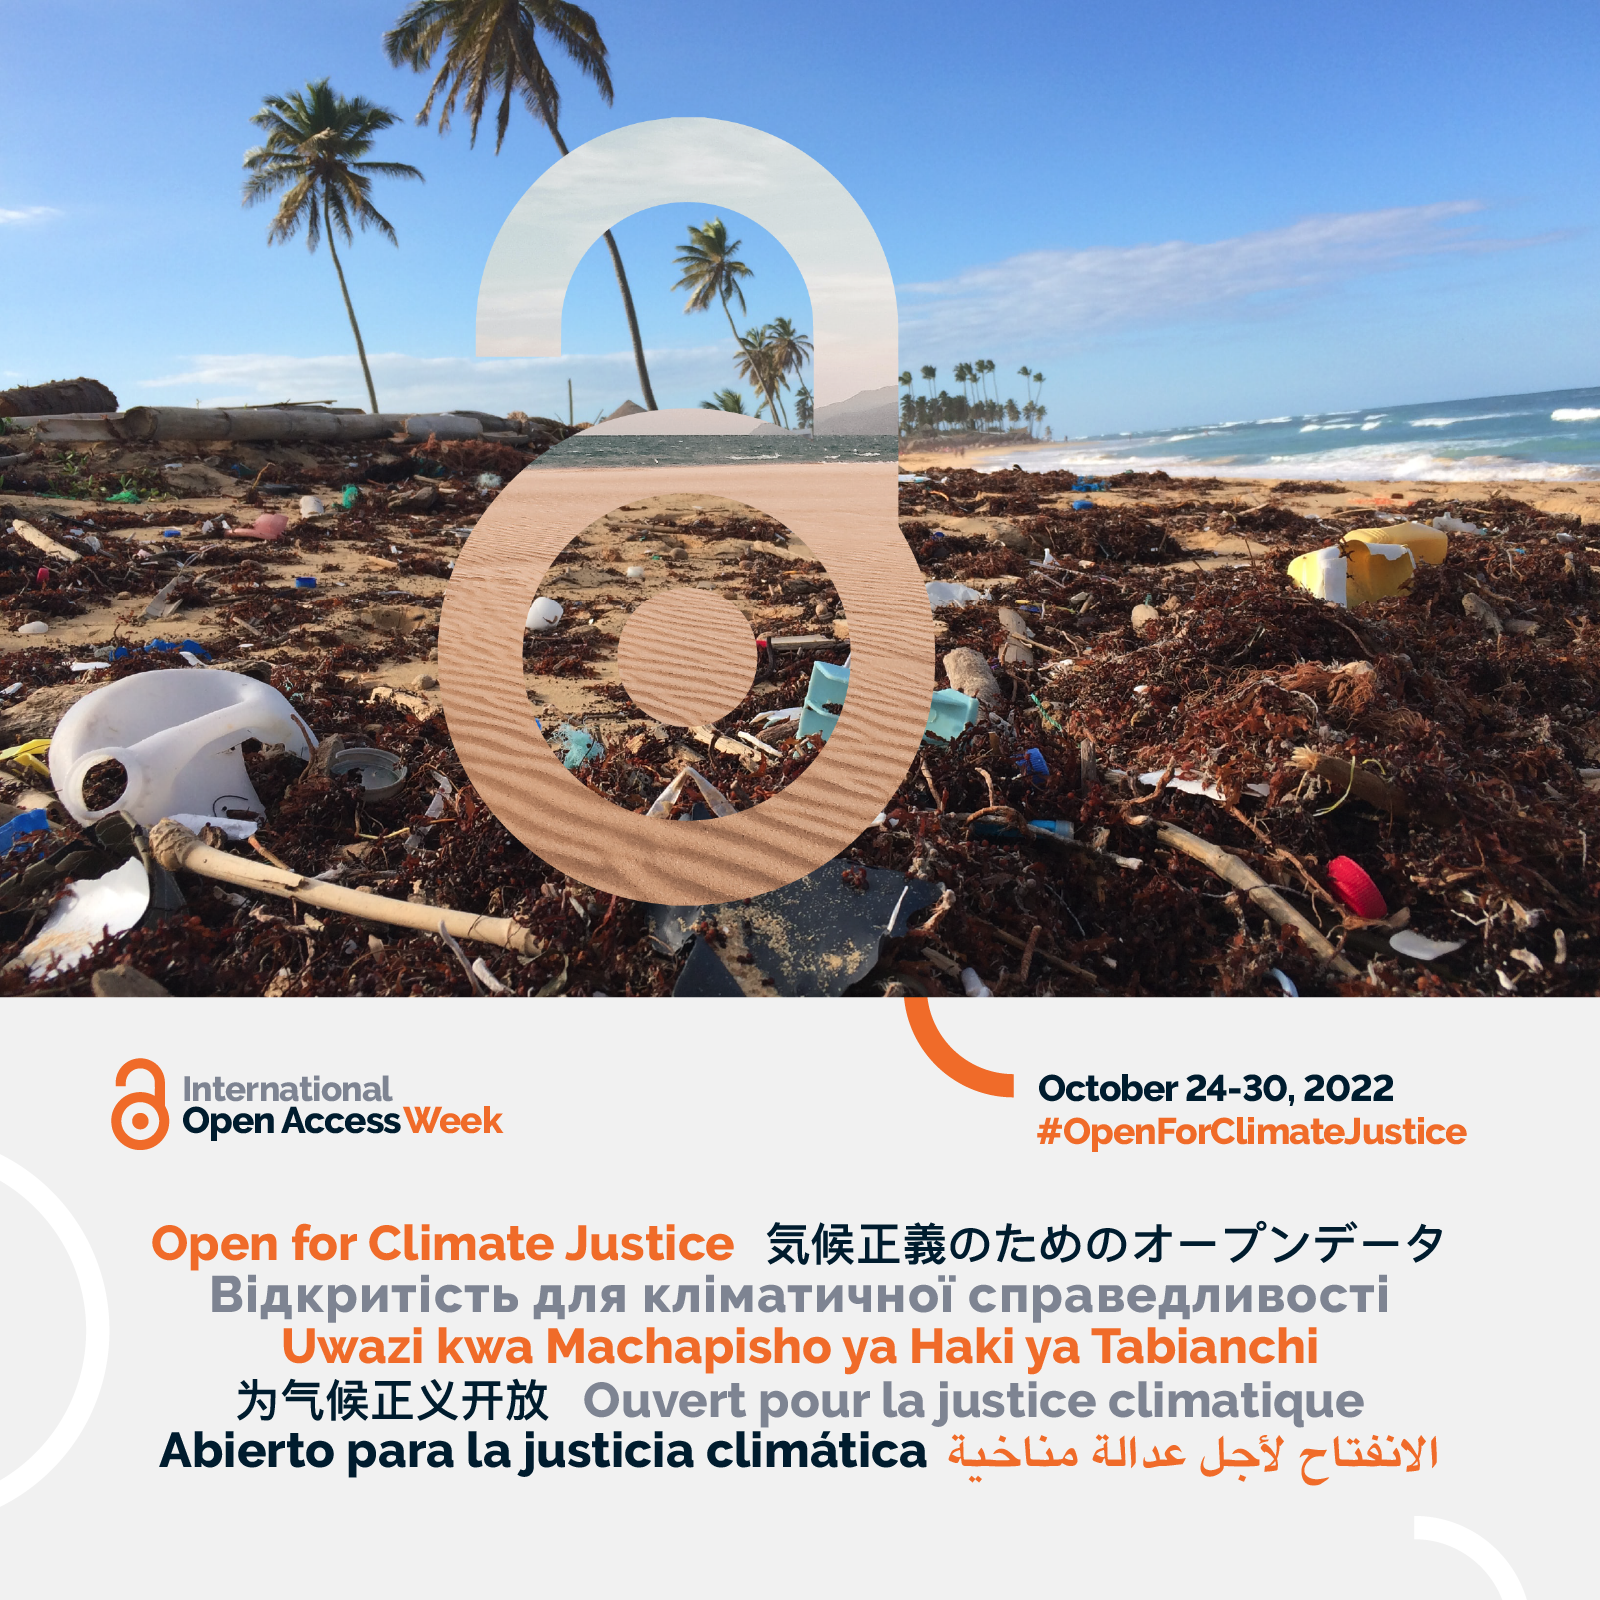 Open Access Week 2022: How does Open Access relate to Climate Justice?